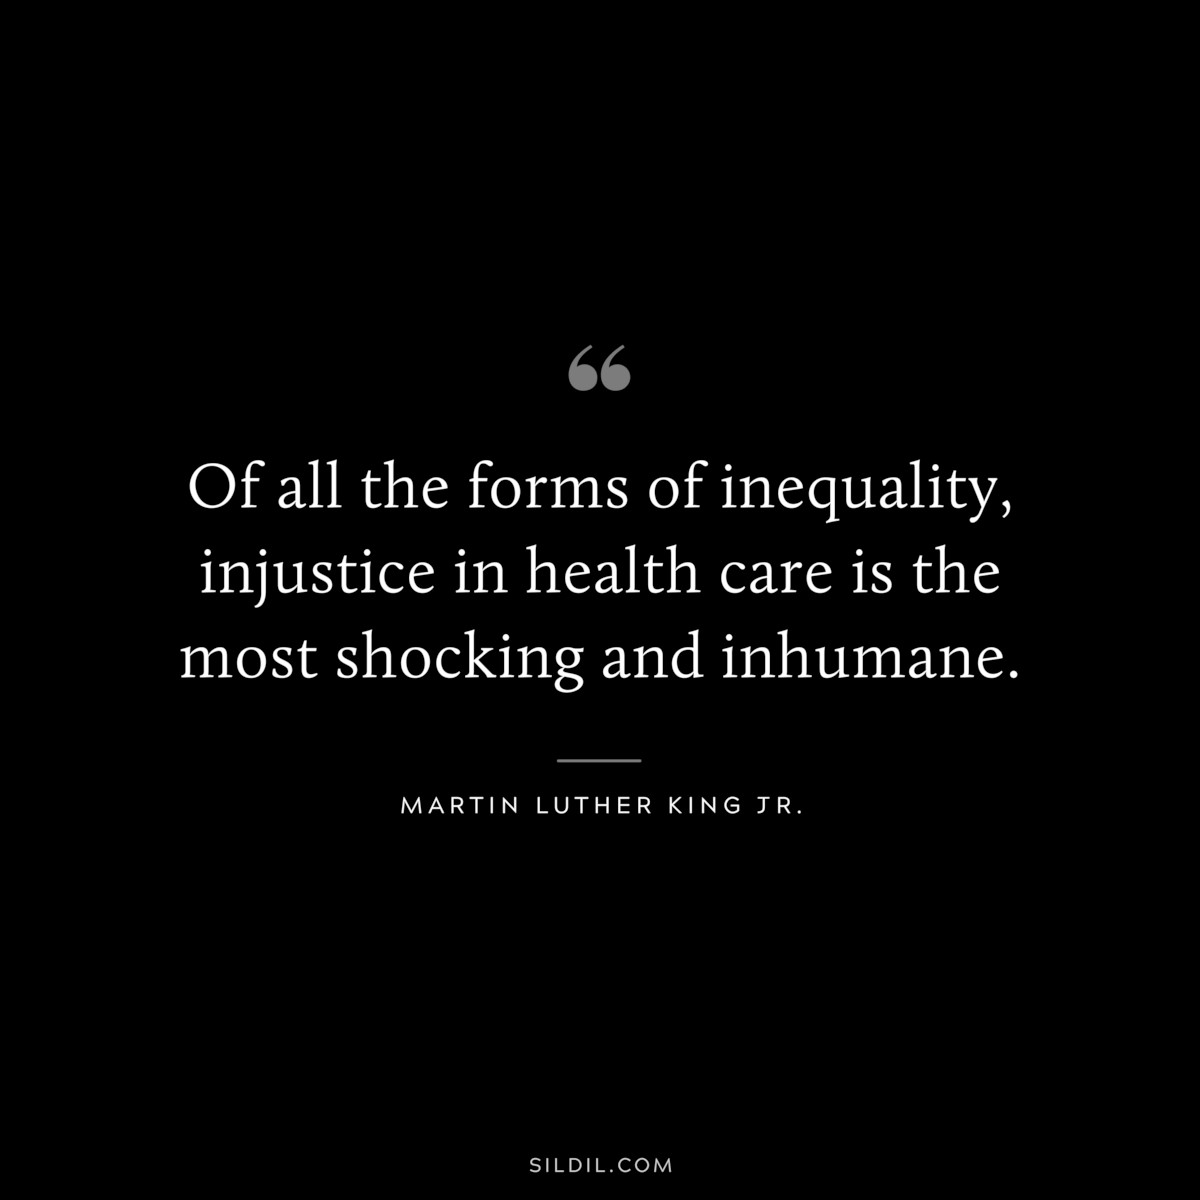 Of all the forms of inequality, injustice in health care is the most shocking and inhumane. ― Martin Luther King Jr.